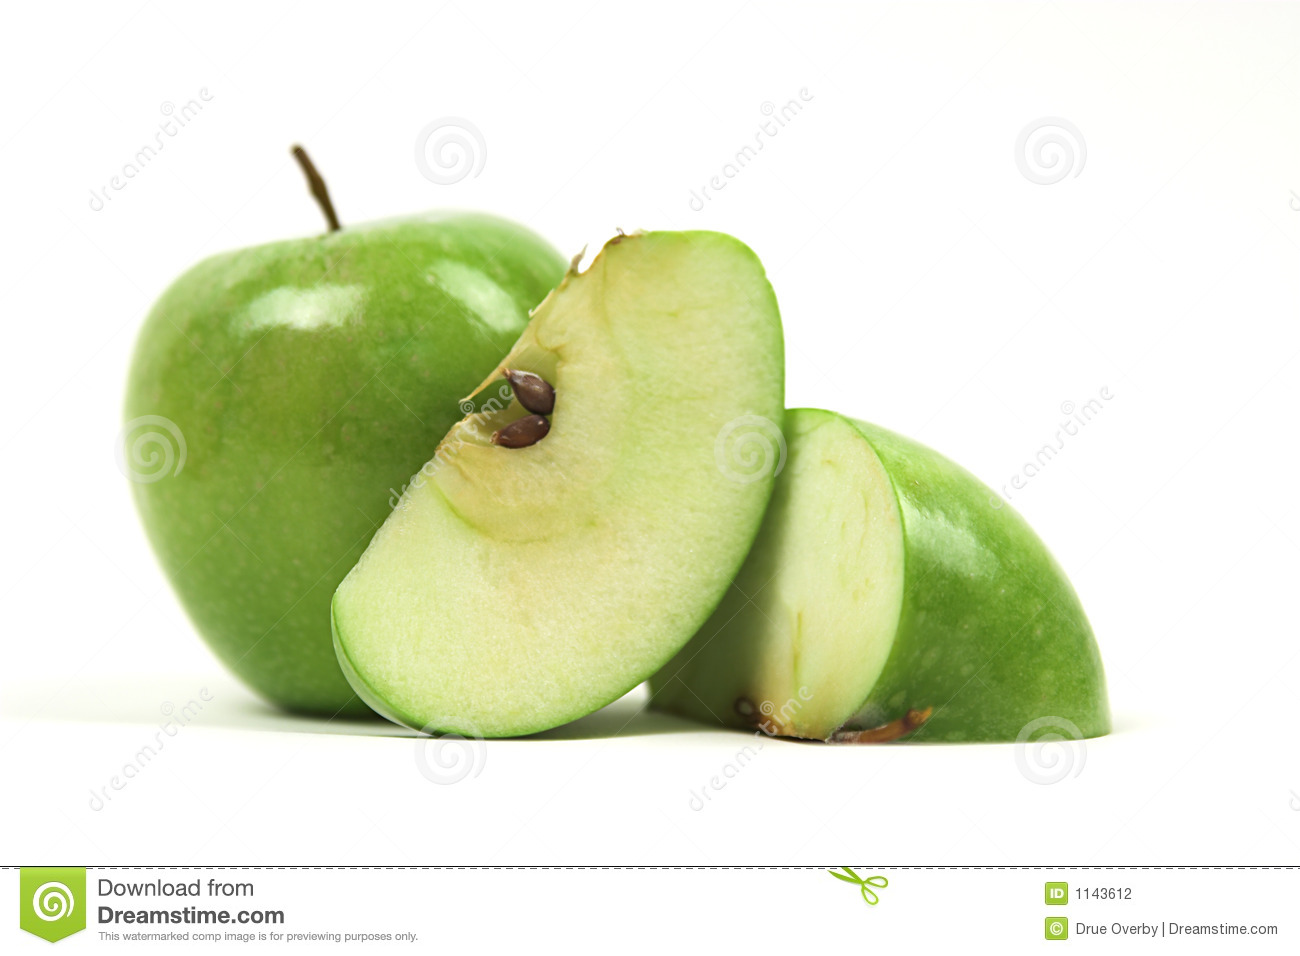 Apple Slices And Full Apple Against White Isolated With Copy Space